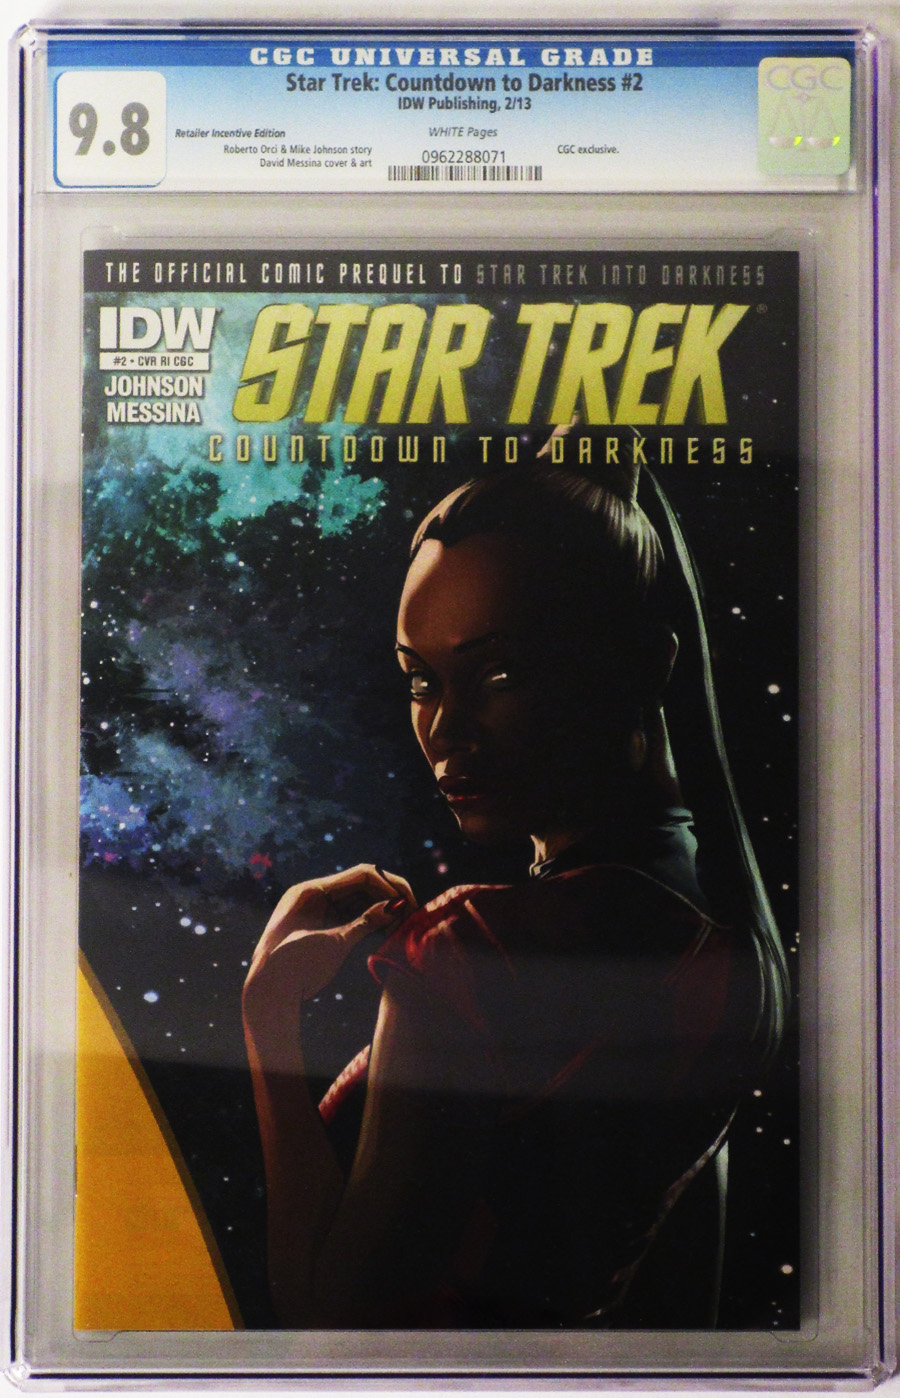 Star Trek Countdown To Darkness #2 Incentive Variant Cover CGC 9.6 Or Above